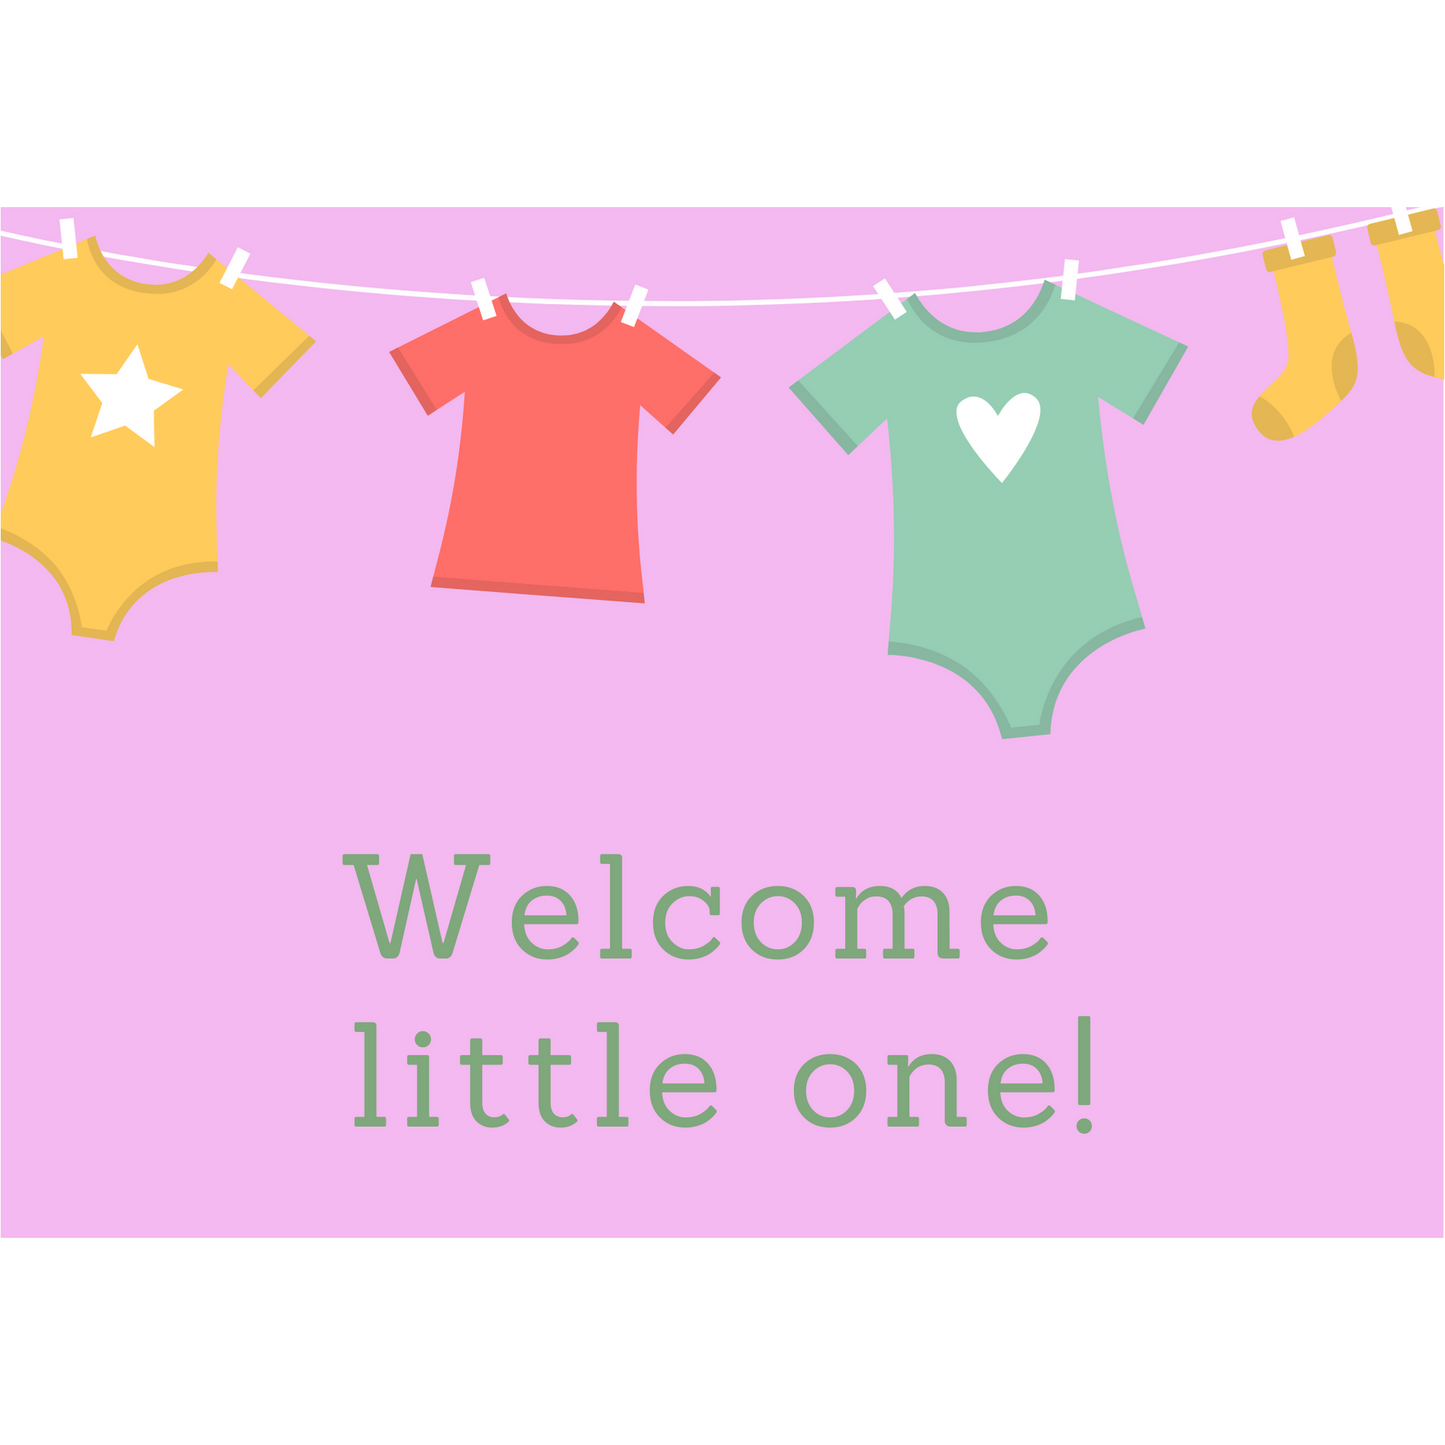 Welcome little one - pink